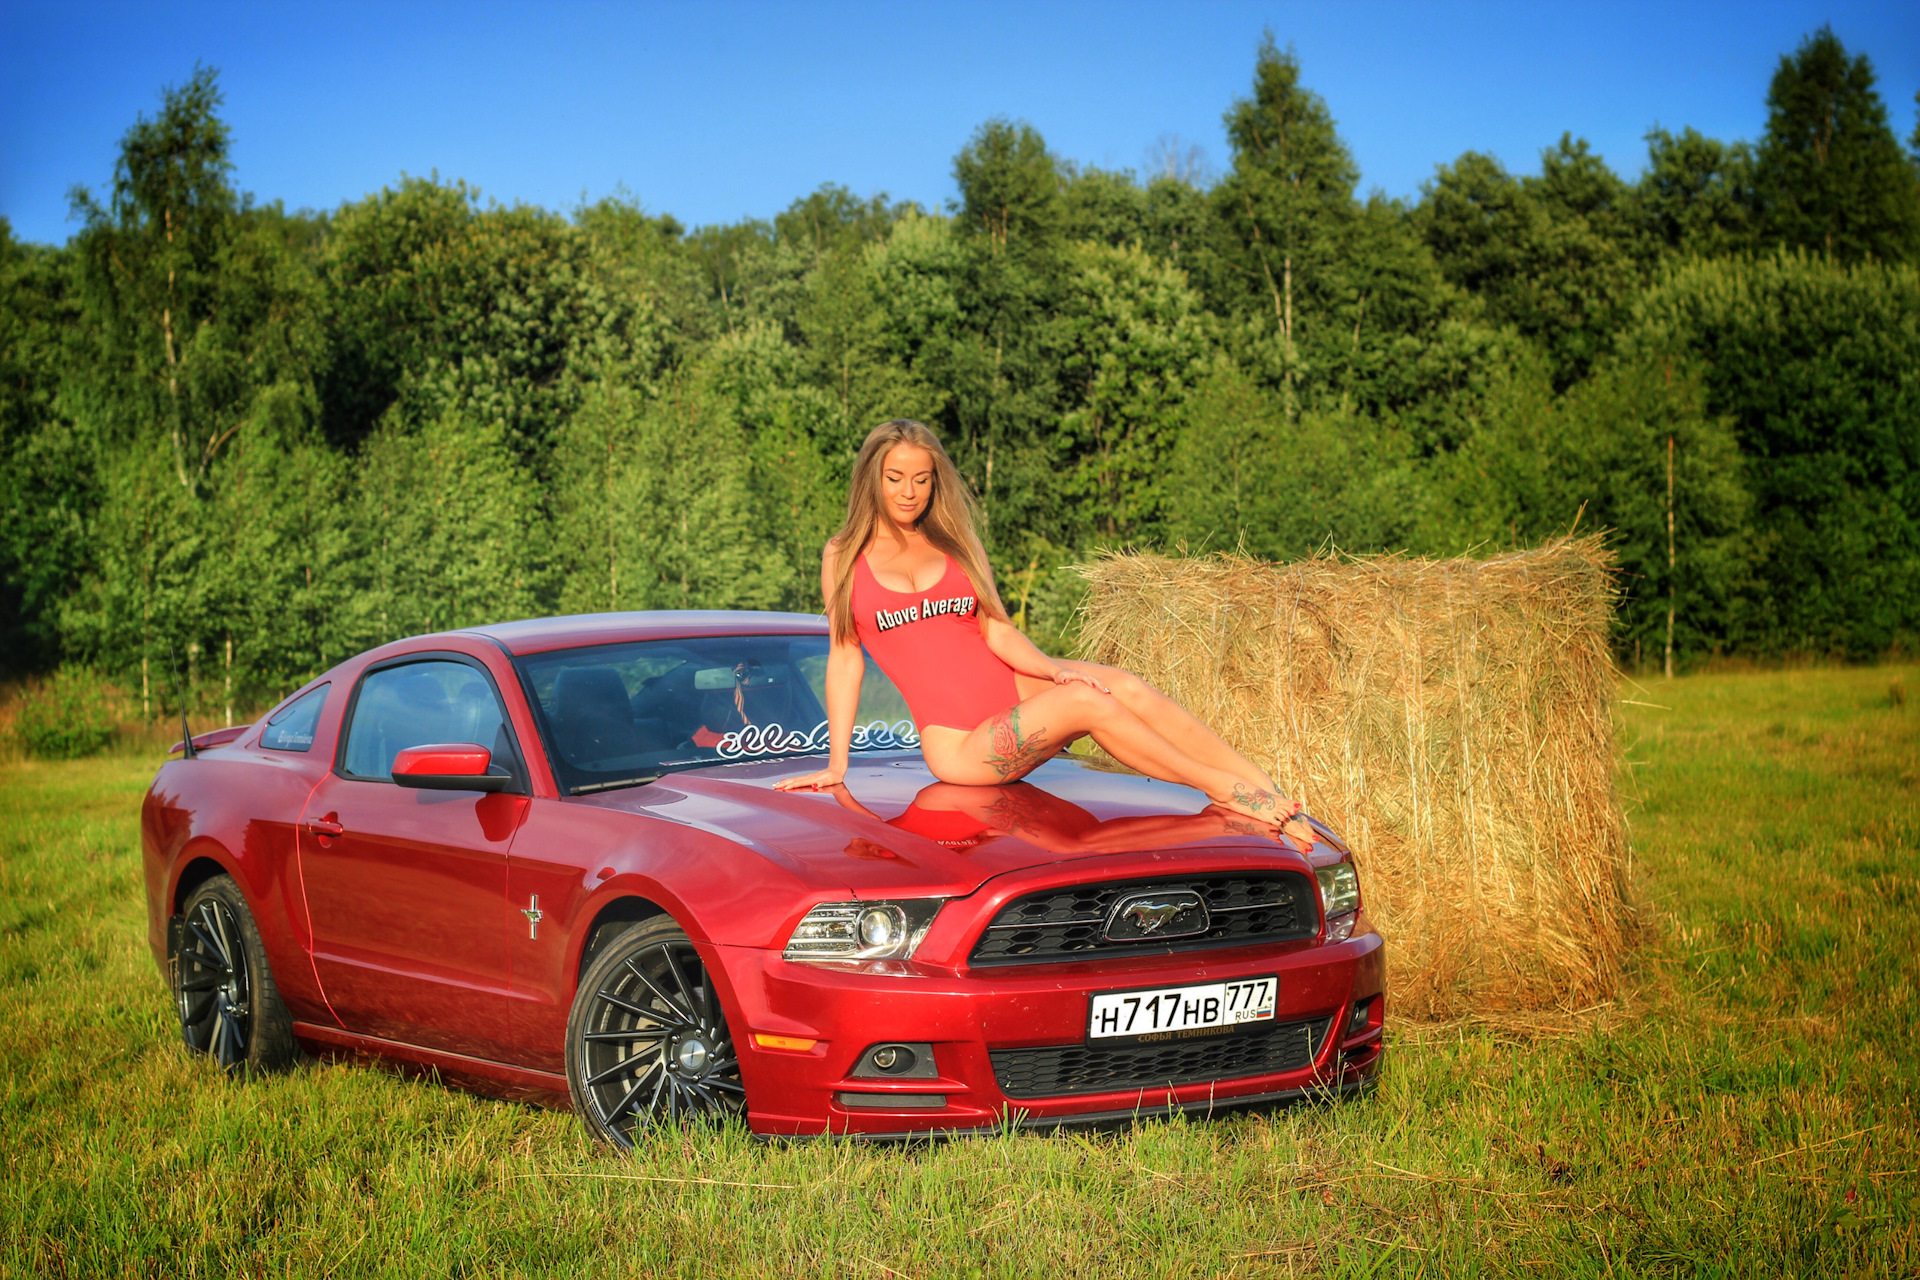 Start drive 2. Ford Mustang drive2. Форд Мустанг драйв 2. Ford Drive 2. Drive Ford Mustang.